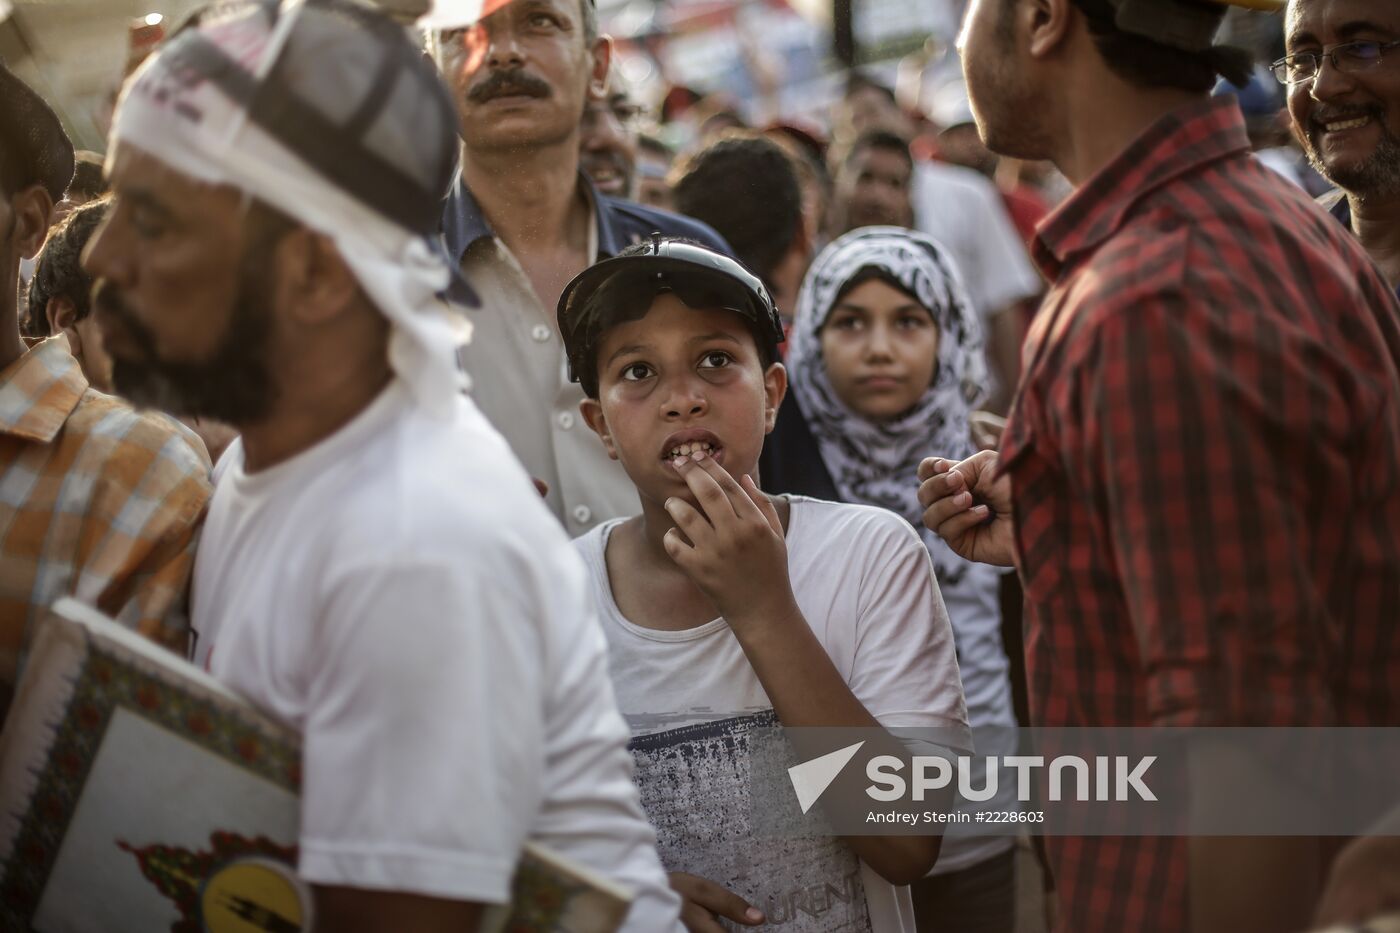 Rally in support of Mohamed Morsi in Cairo